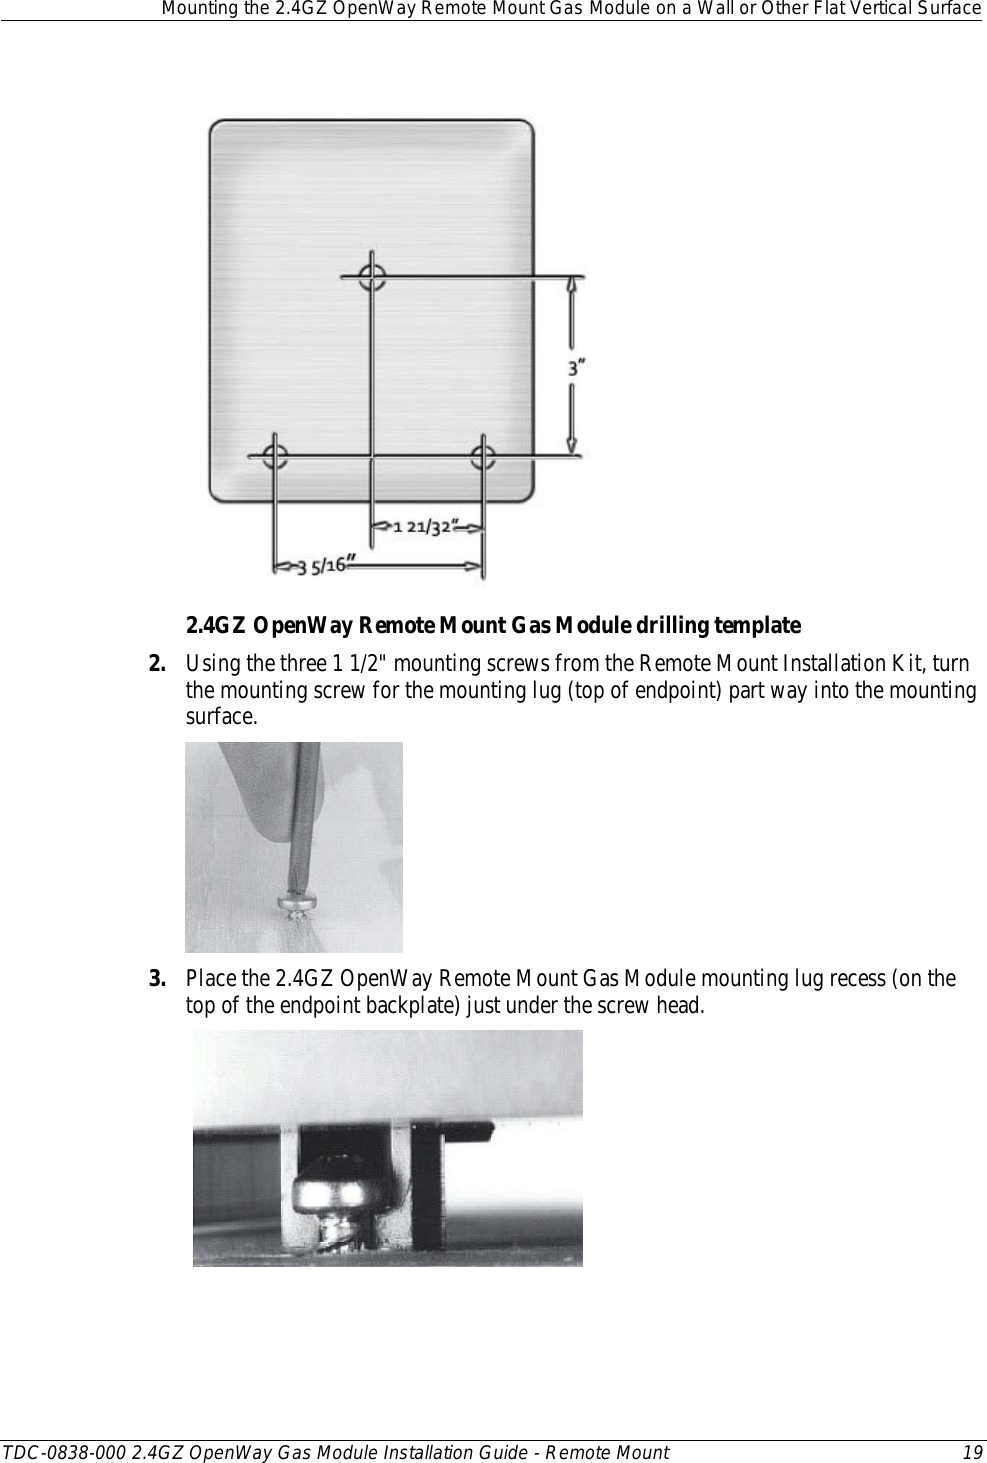  Mounting the 2.4GZ OpenWay Remote Mount Gas Module on a Wall or Other Flat Vertical Surface  TDC-0838-000 2.4GZ OpenWay Gas Module Installation Guide - Remote Mount 19   2.4GZ OpenWay Remote Mount Gas Module drilling template 2. Using the three 1 1/2&quot; mounting screws from the Remote Mount Installation Kit, turn the mounting screw for the mounting lug (top of endpoint) part way into the mounting surface.   3. Place the 2.4GZ OpenWay Remote Mount Gas Module mounting lug recess (on the top of the endpoint backplate) just under the screw head.    